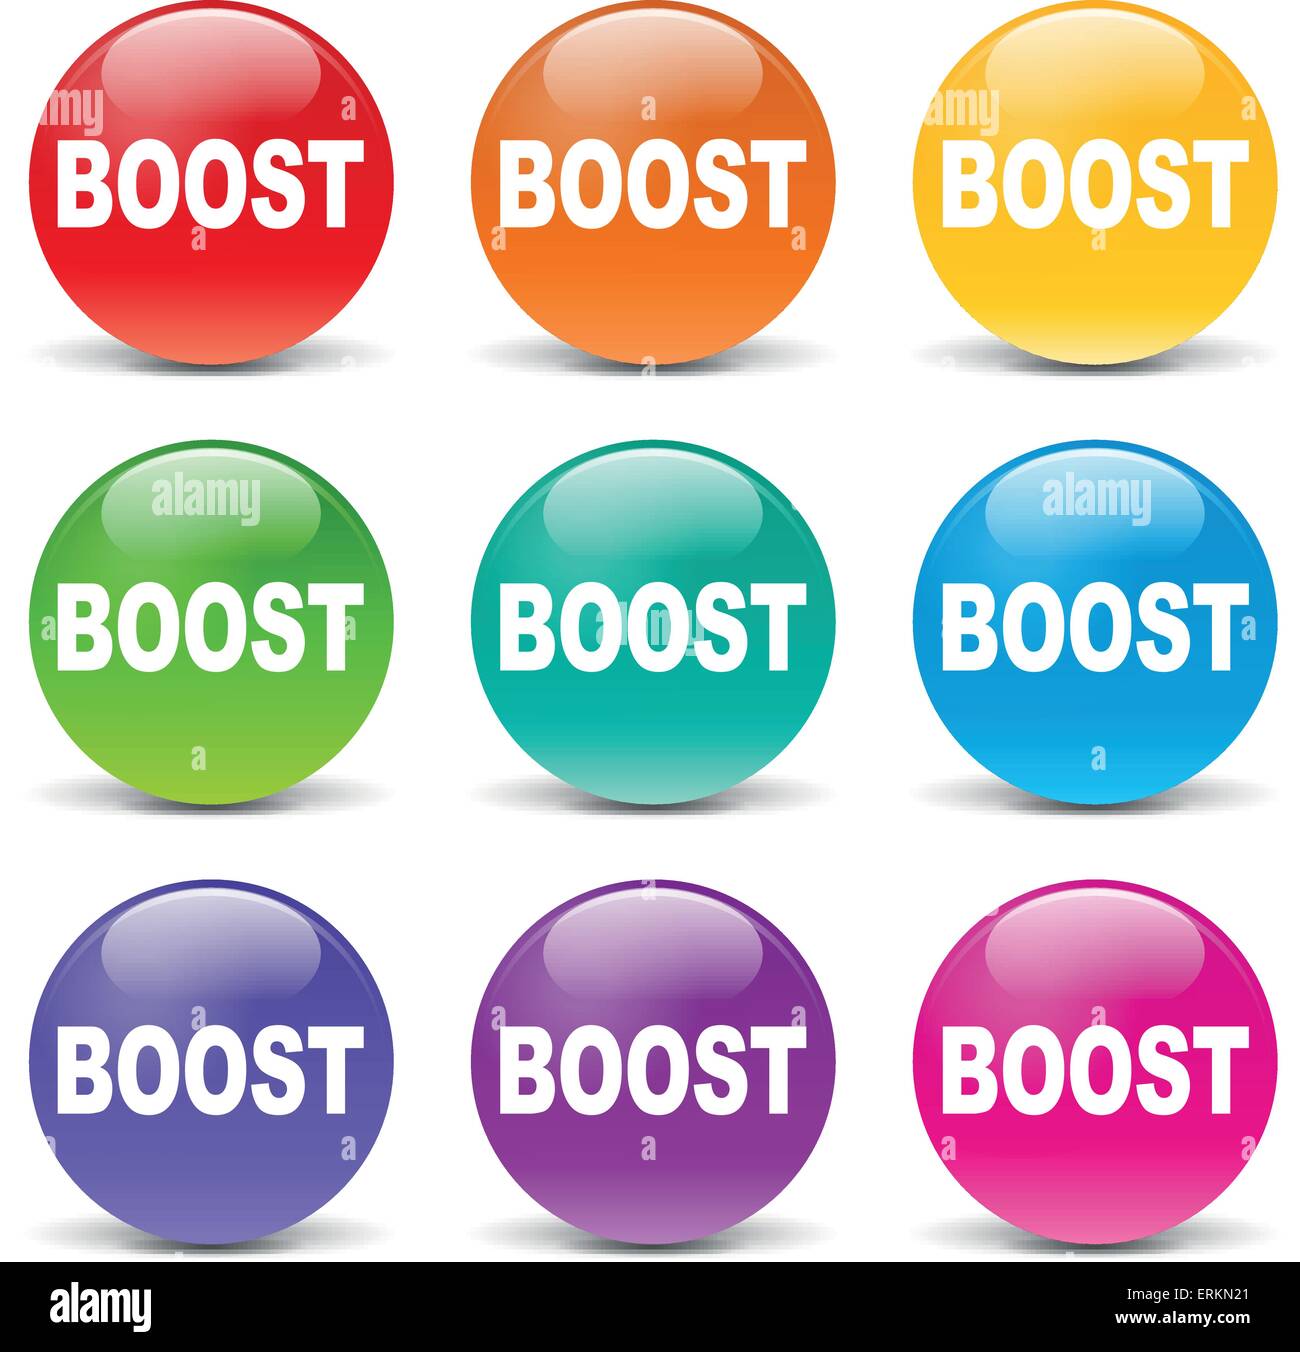 Vector illustration of boost set icons on white background Stock Vector